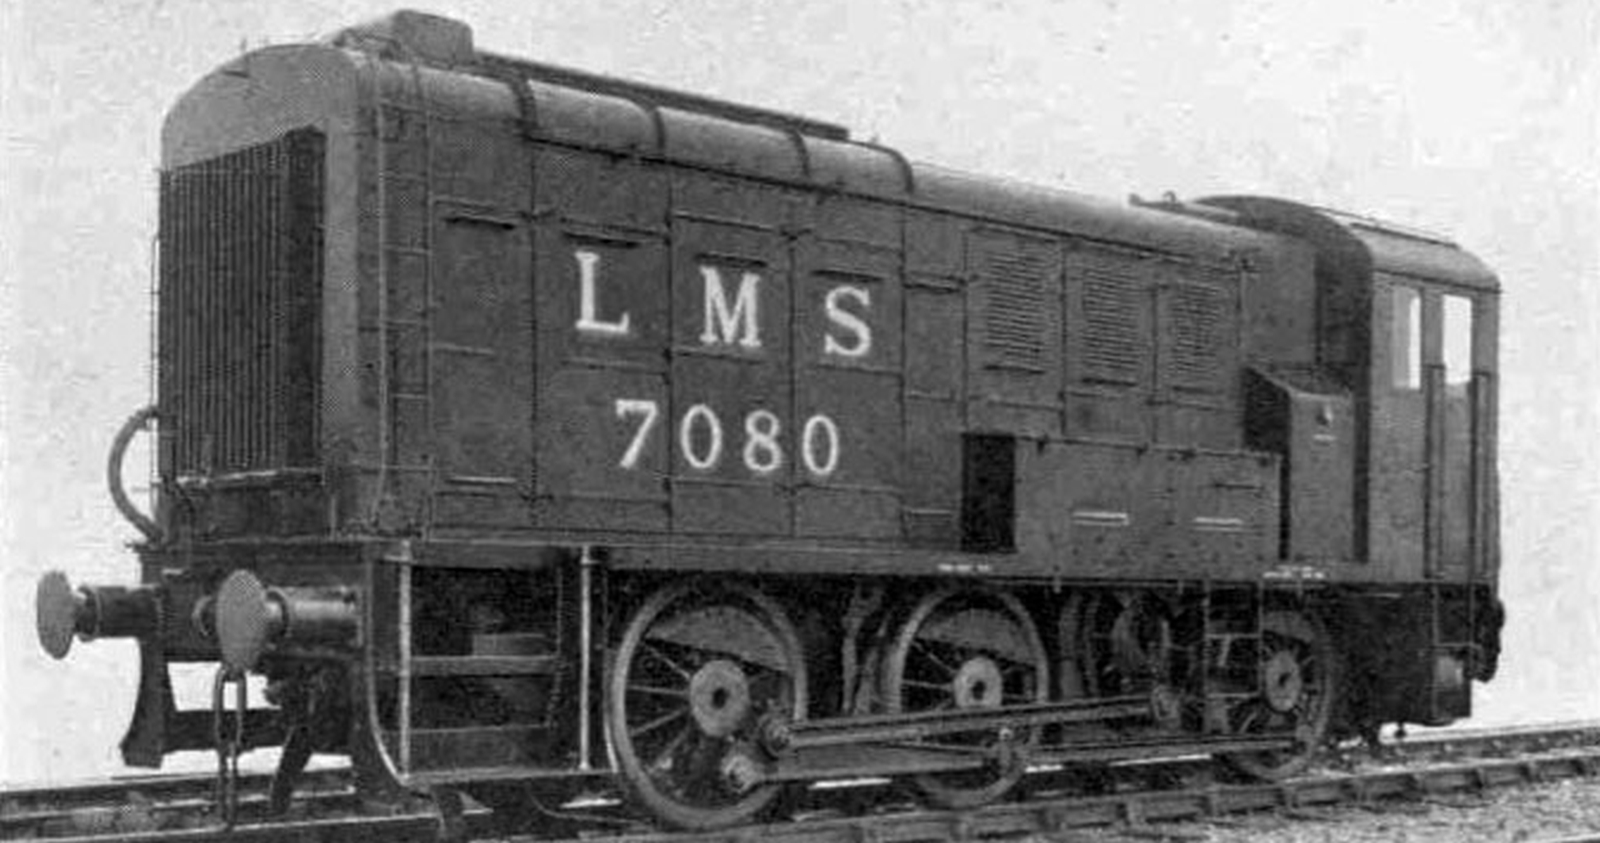 Works photo of LMS No. 7080